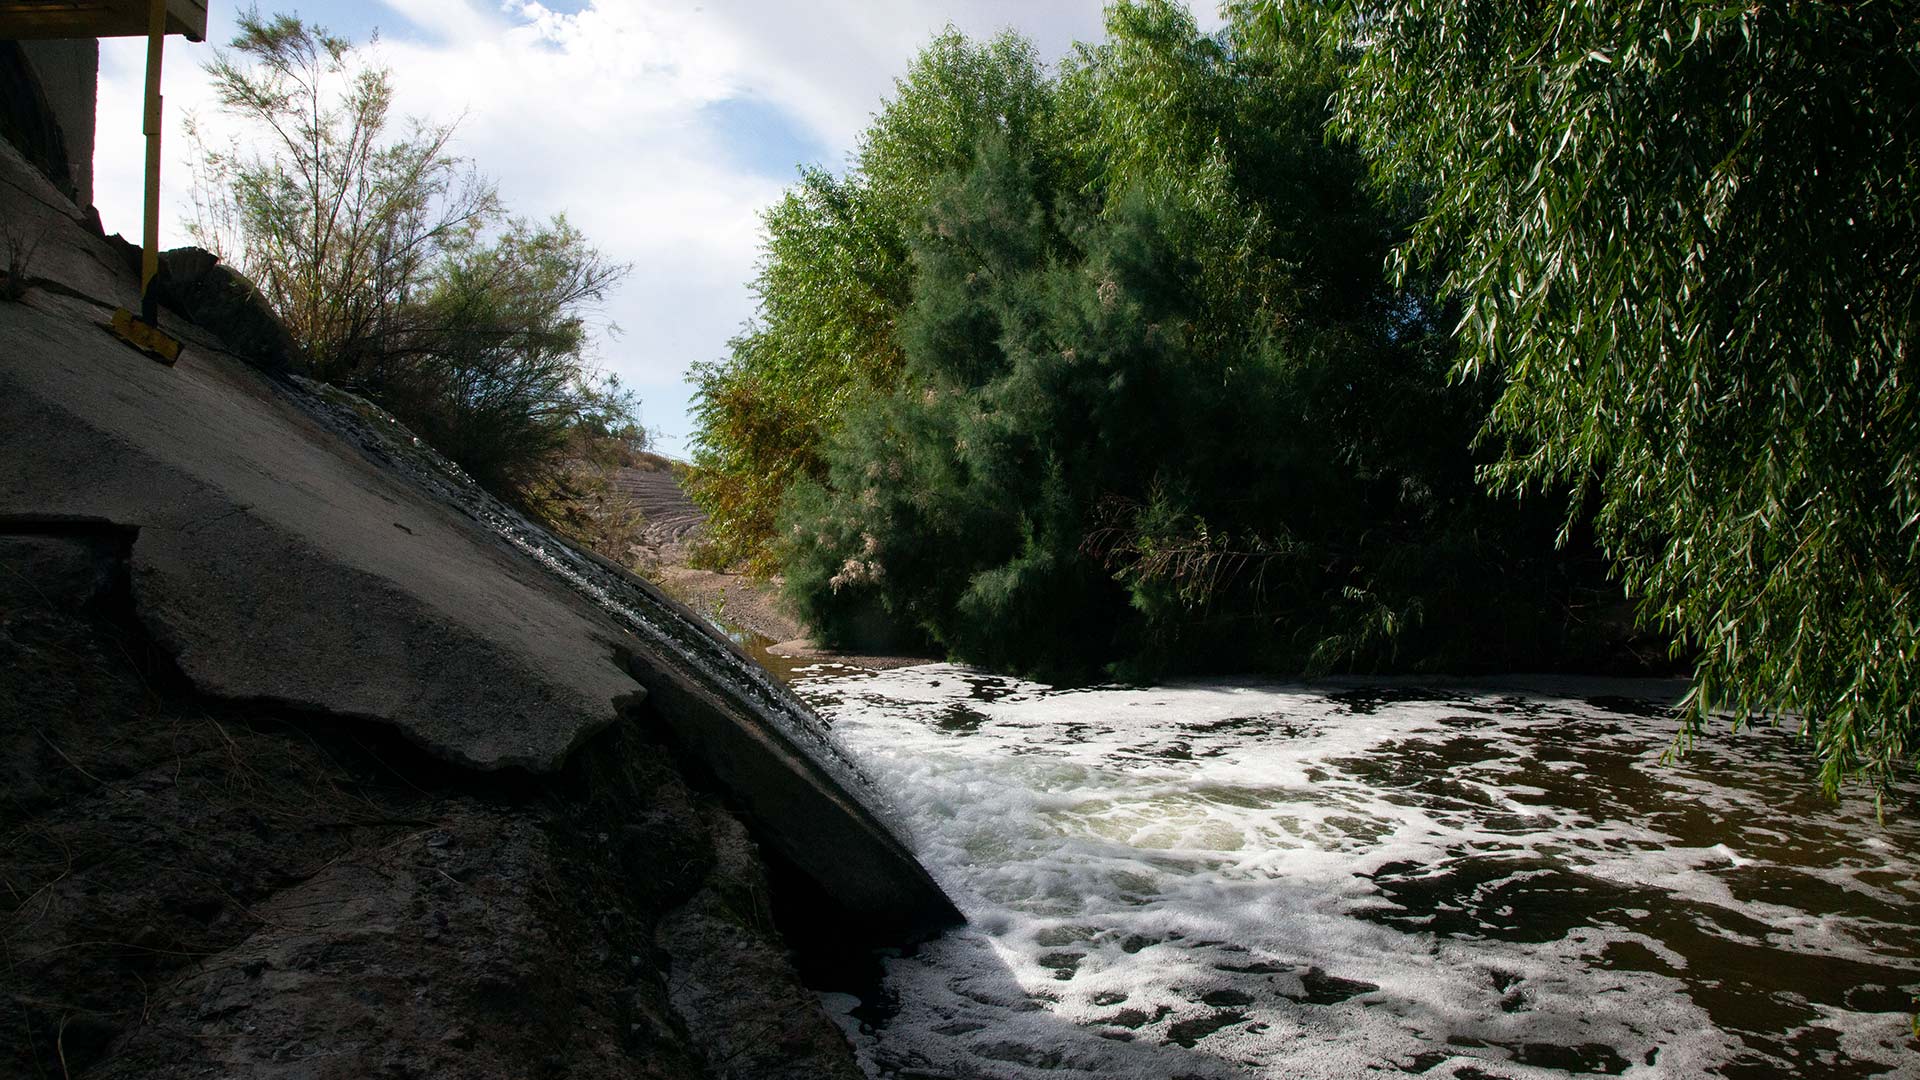 Effluent gushes out of the outfall, into the Santa Cruz River. The outfall of water is constantly flowing, but there is a diurnal fluctuation due to cyclical human water use. 